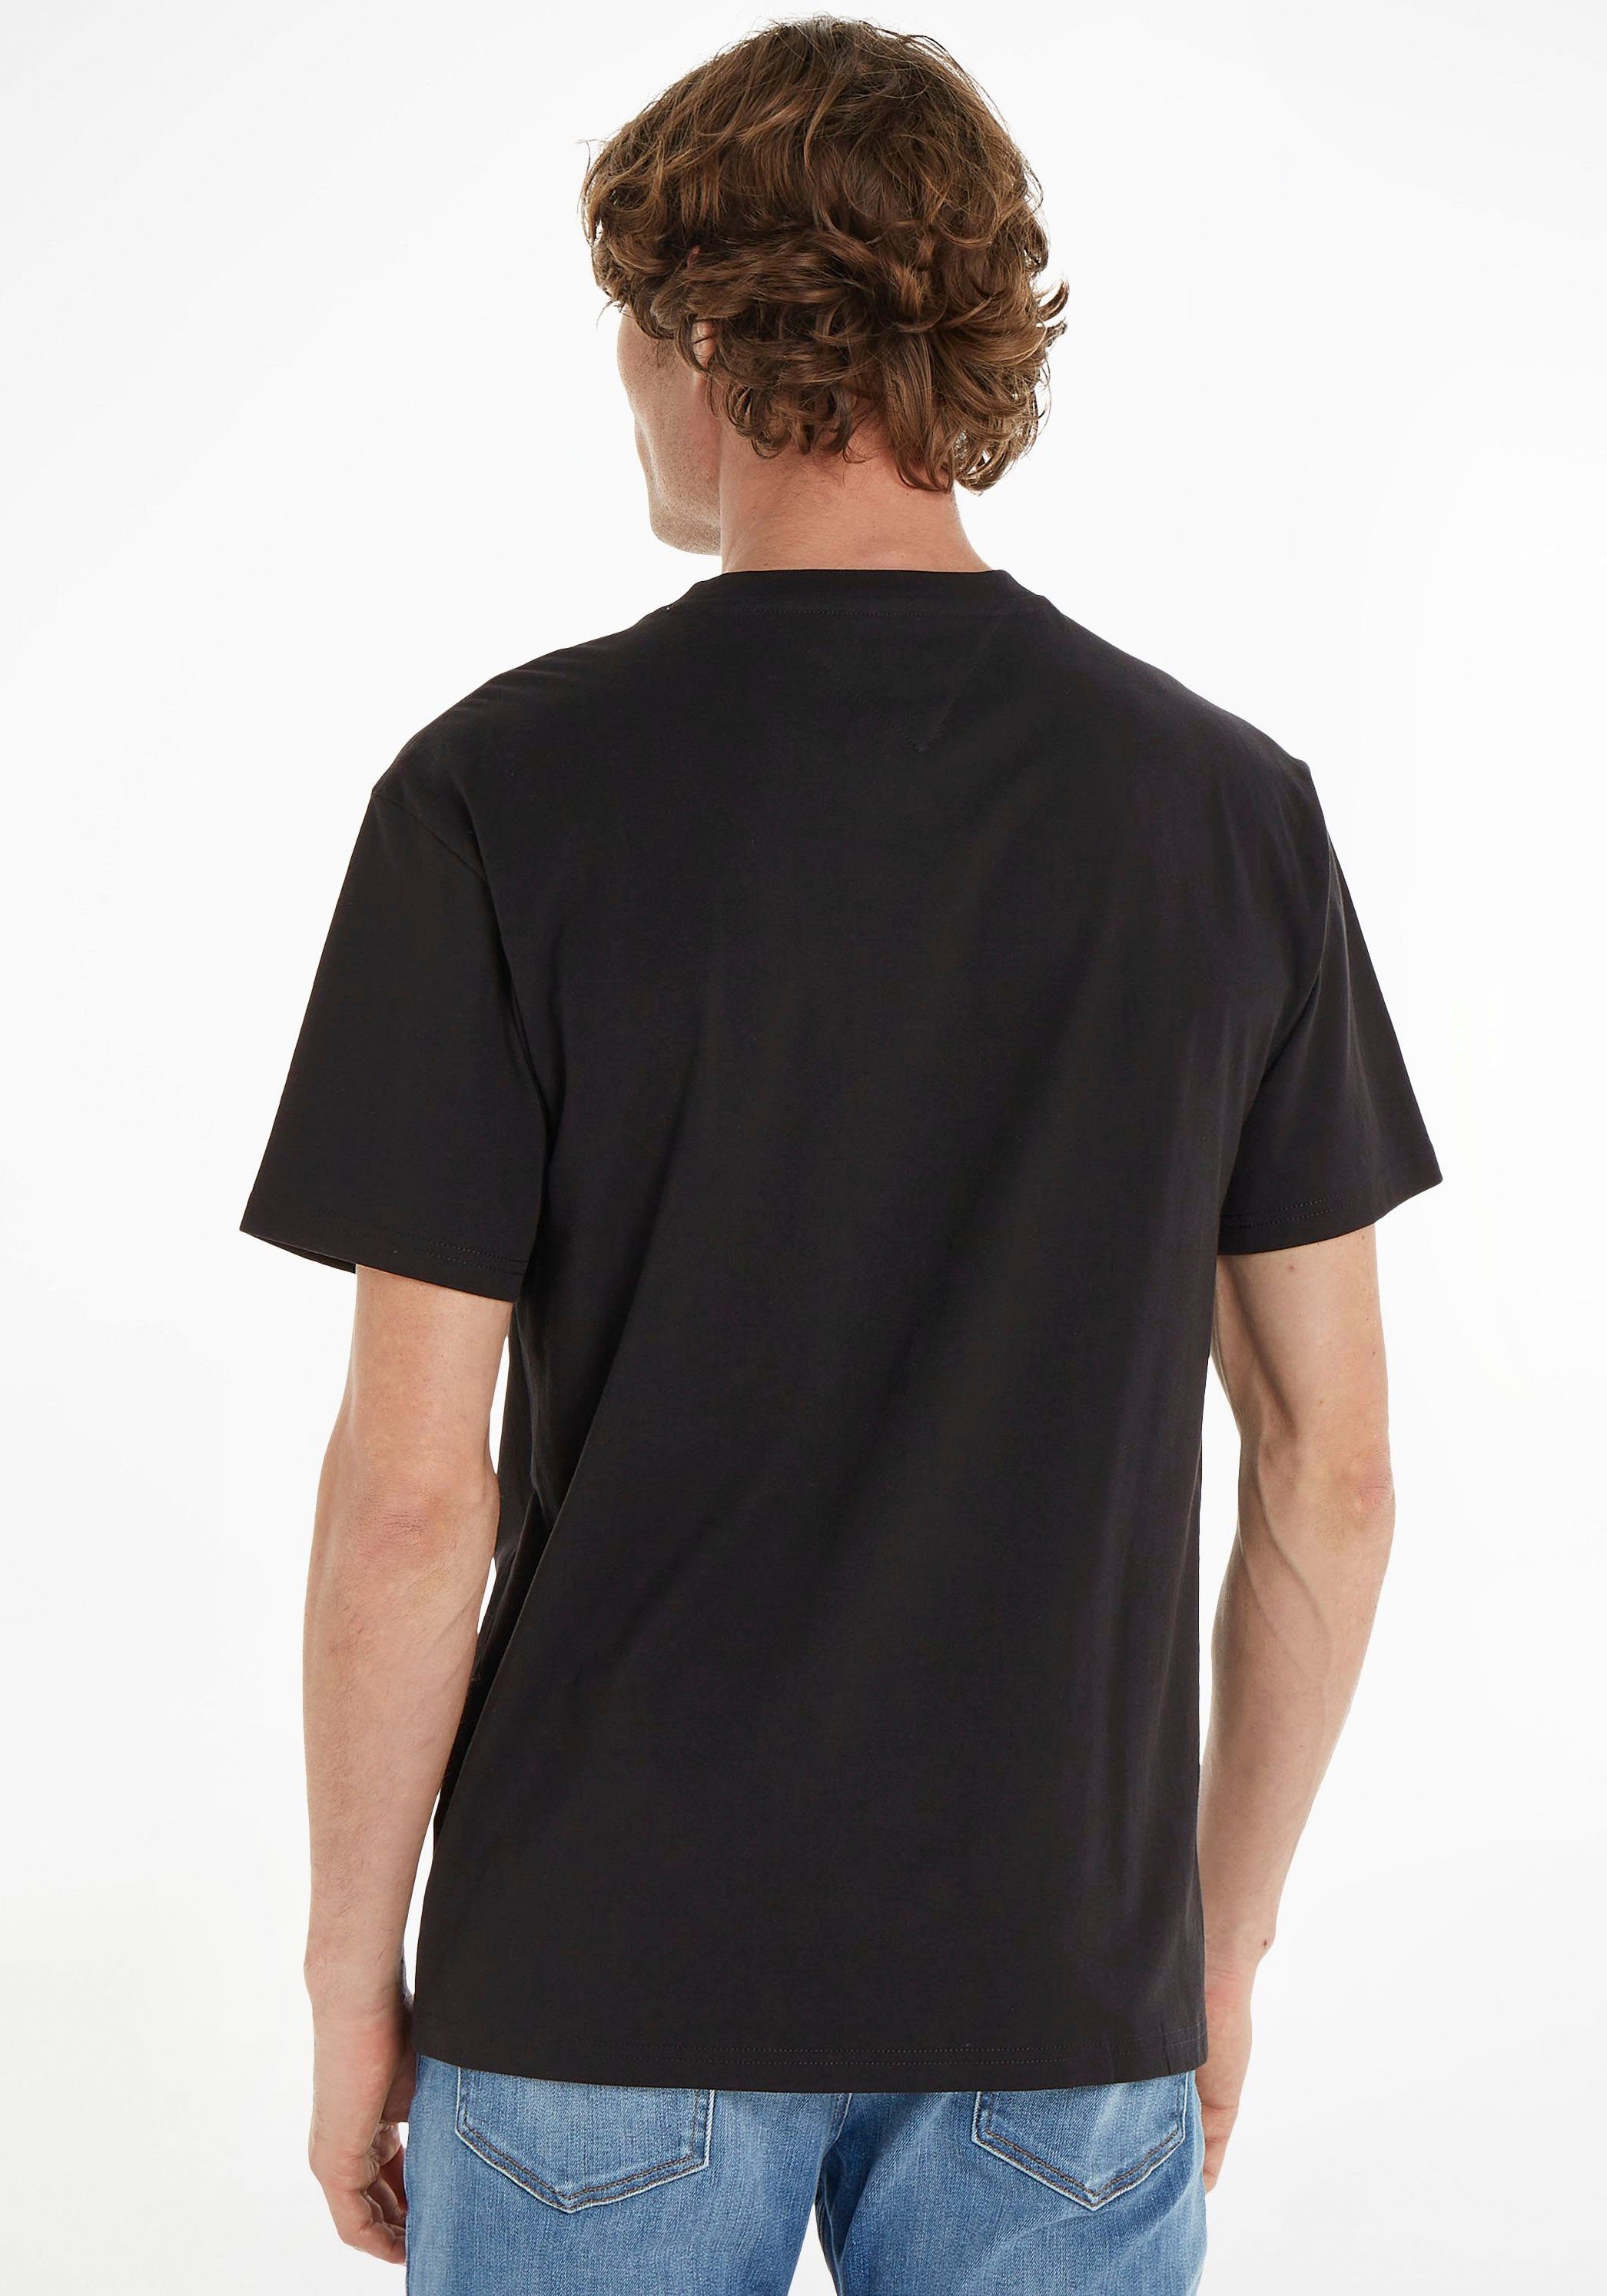 CLSC T-Shirt TJM Black Tommy Jeans LINEAR TEE CHEST